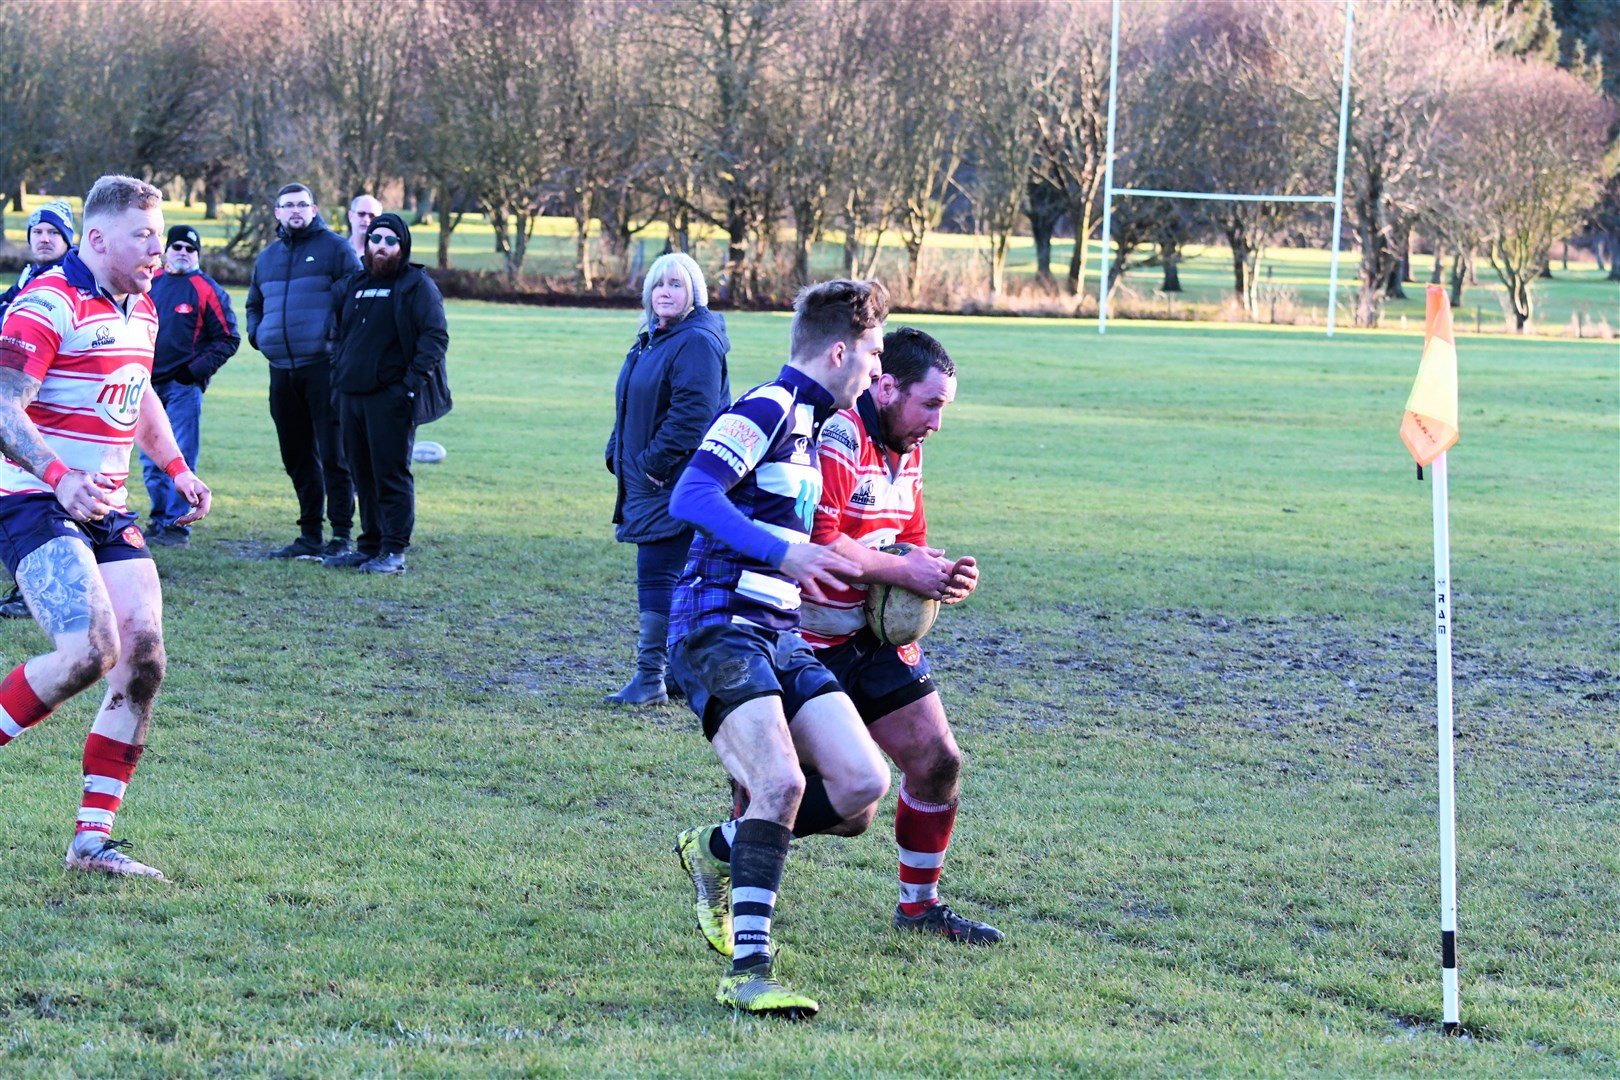 John Westmacott having gathered cross kick stays in field on way to score. Picture by James Officer